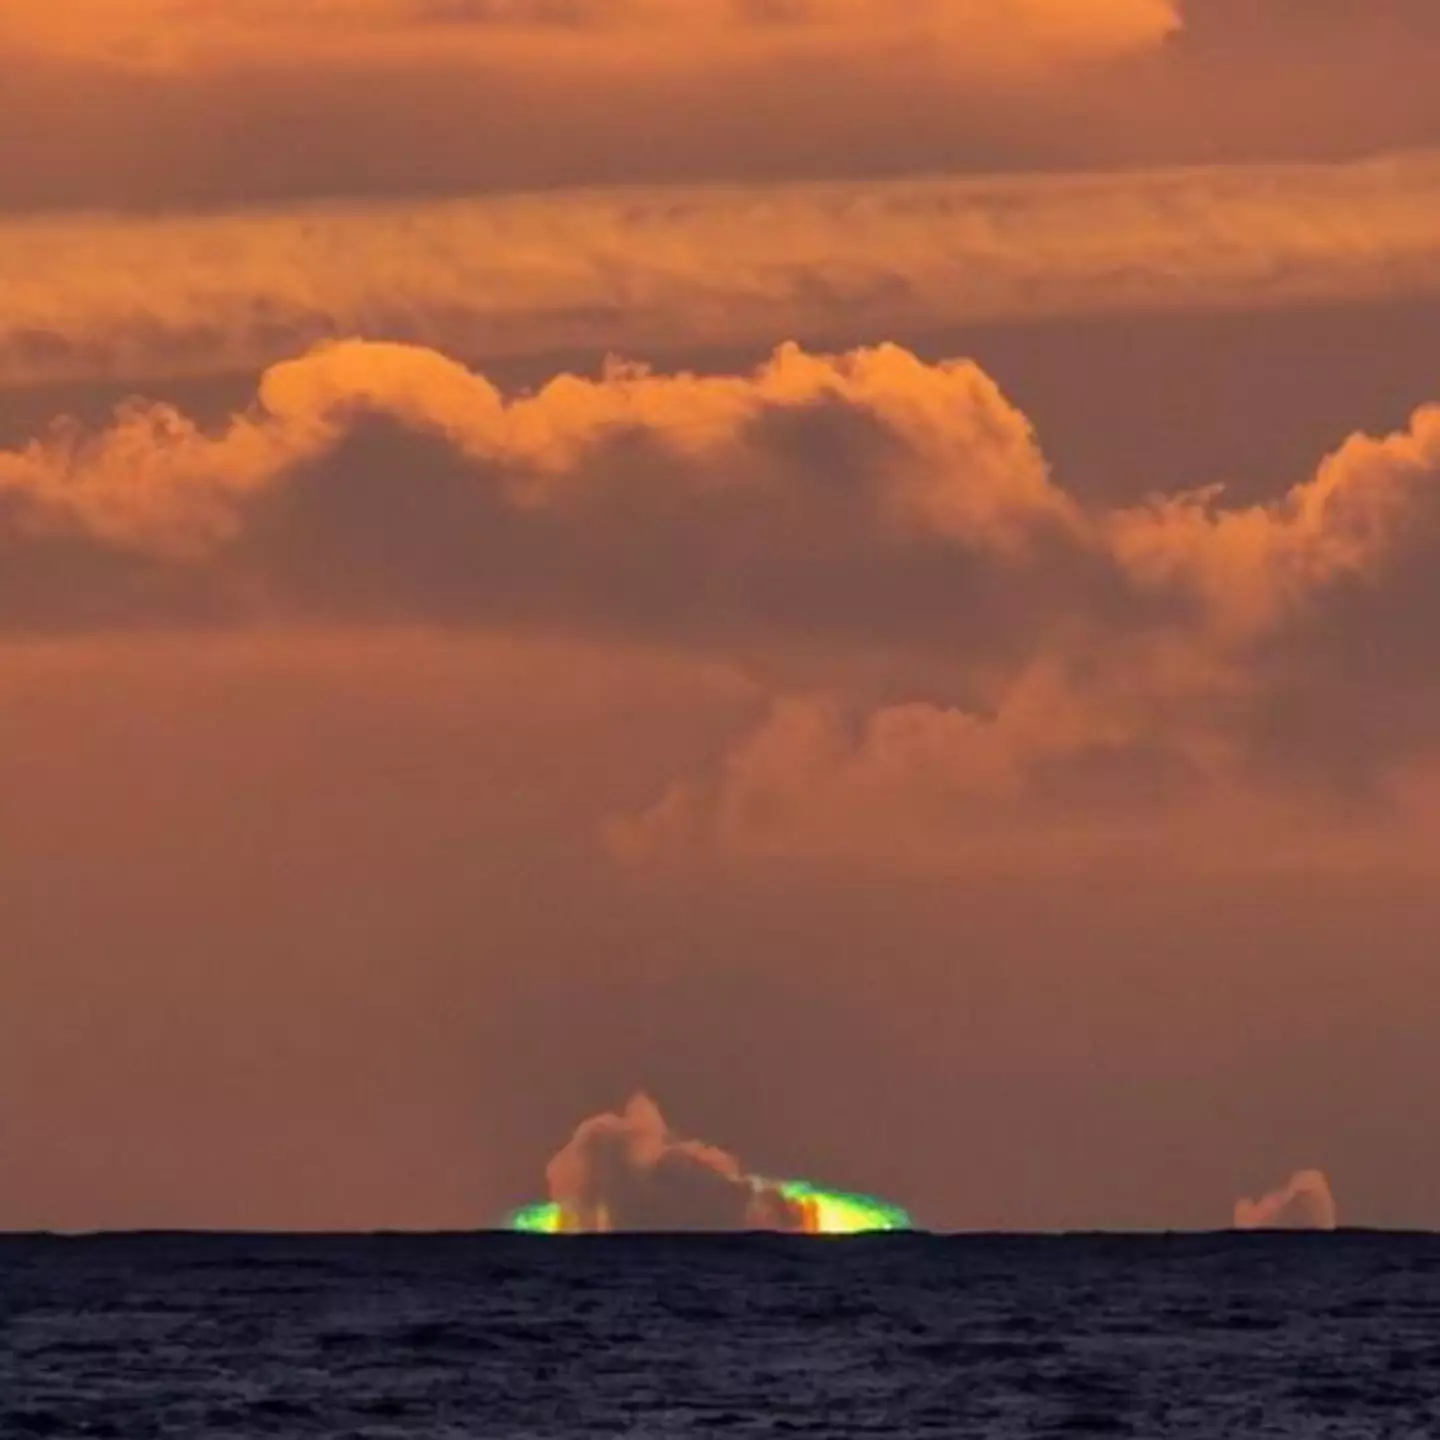 Man captures photograph of the Sun flashing green in incredibly rare optical illusion